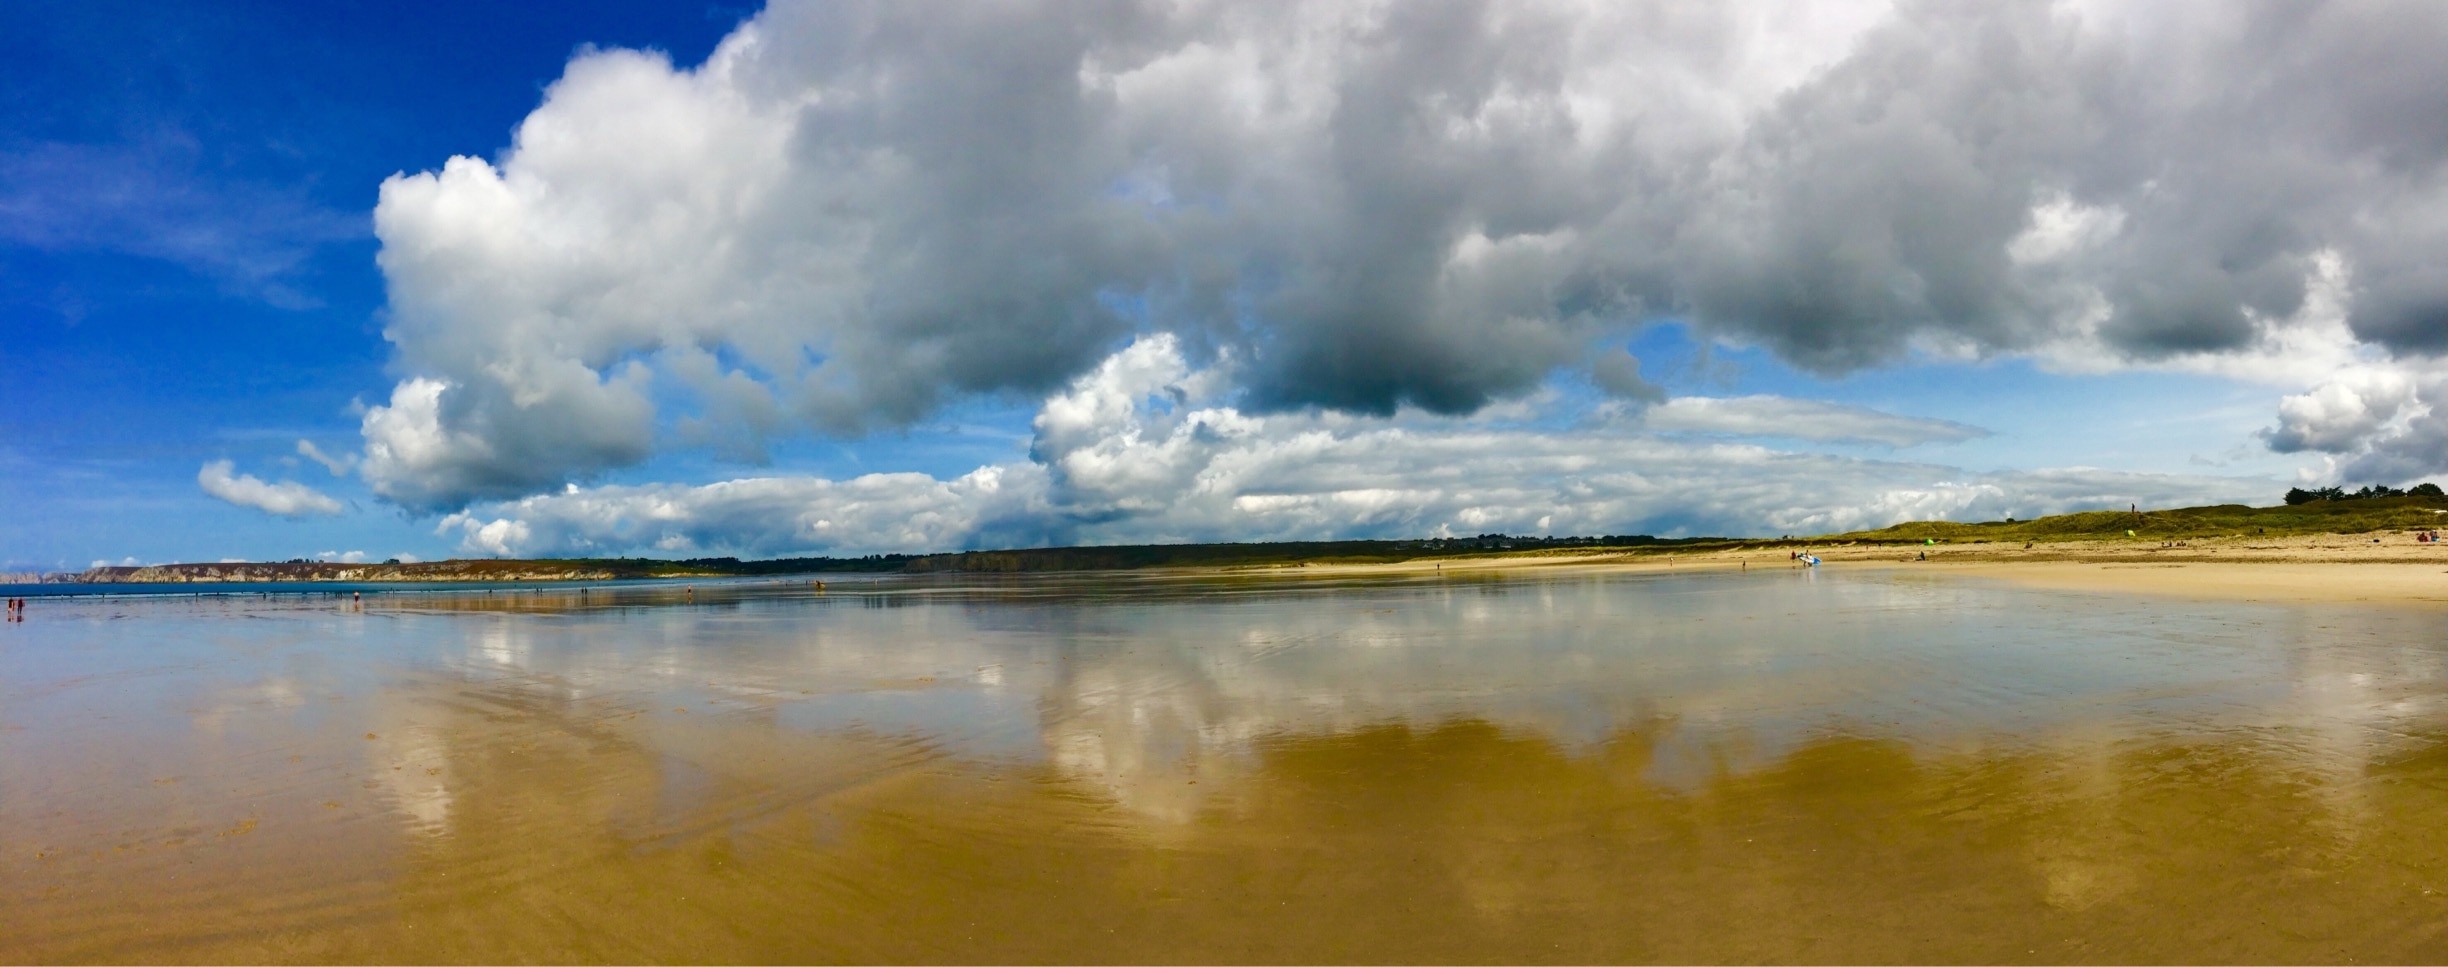 I liked the reflection of the clouds on the wet sand at low tide. 